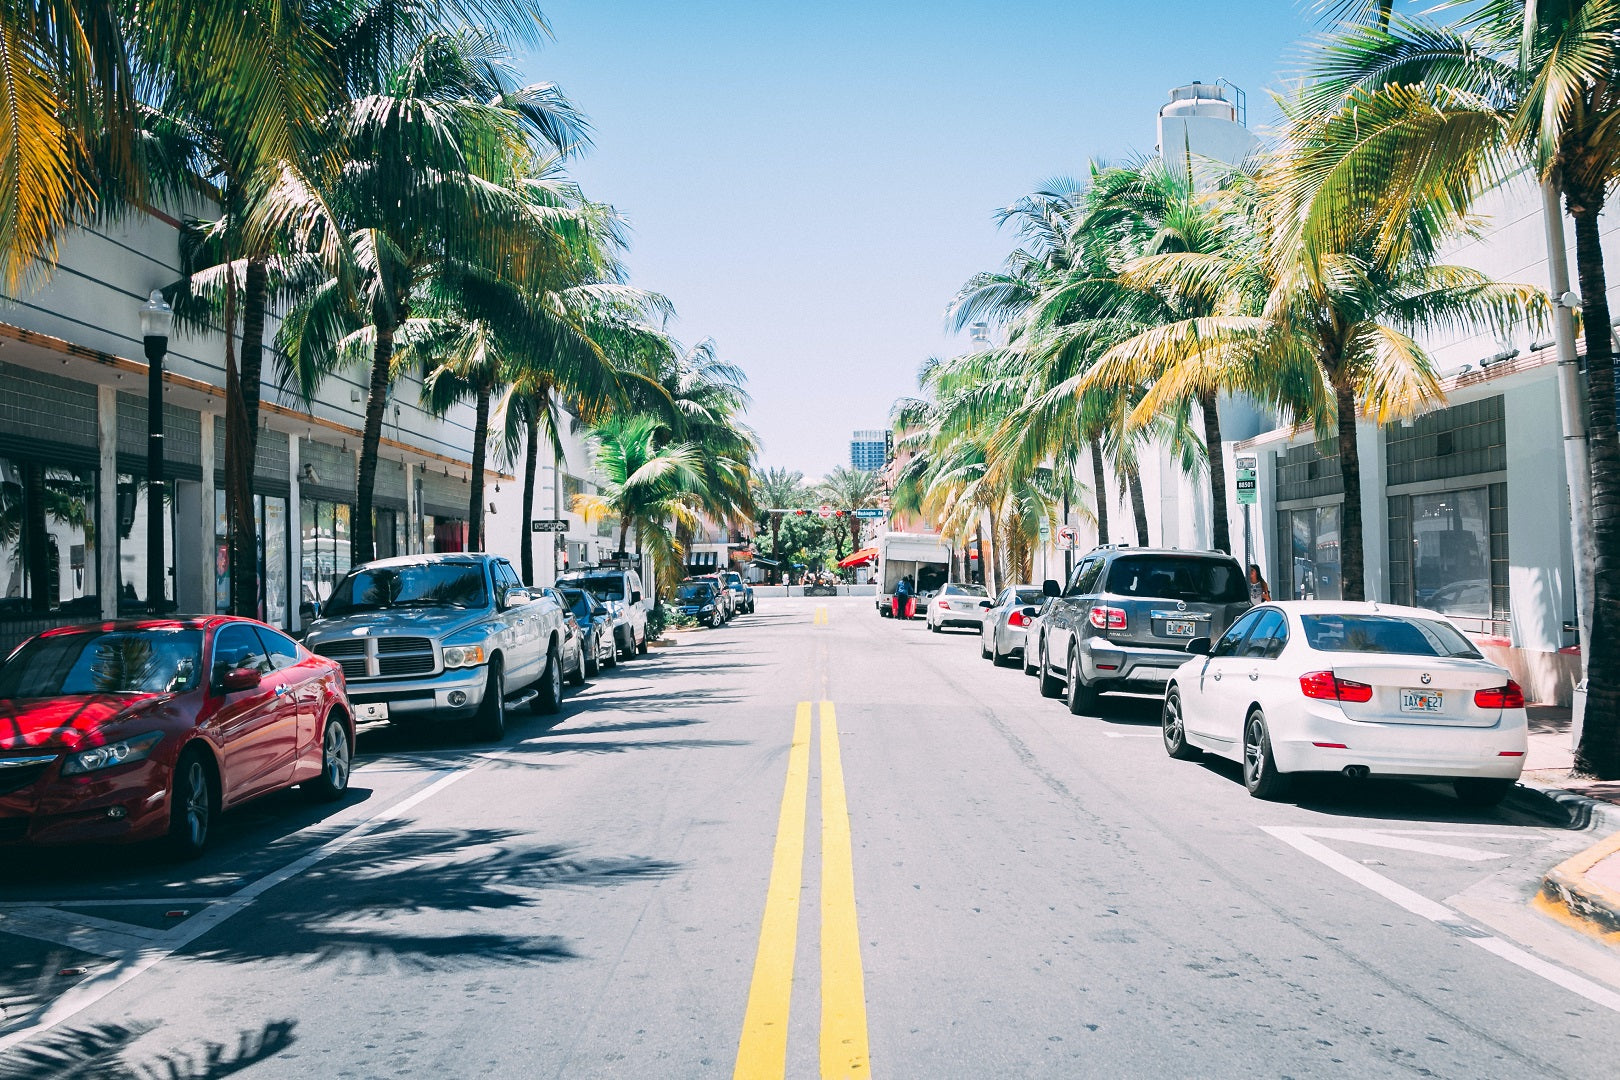 A shot of cars parked on a street in Miami Beach